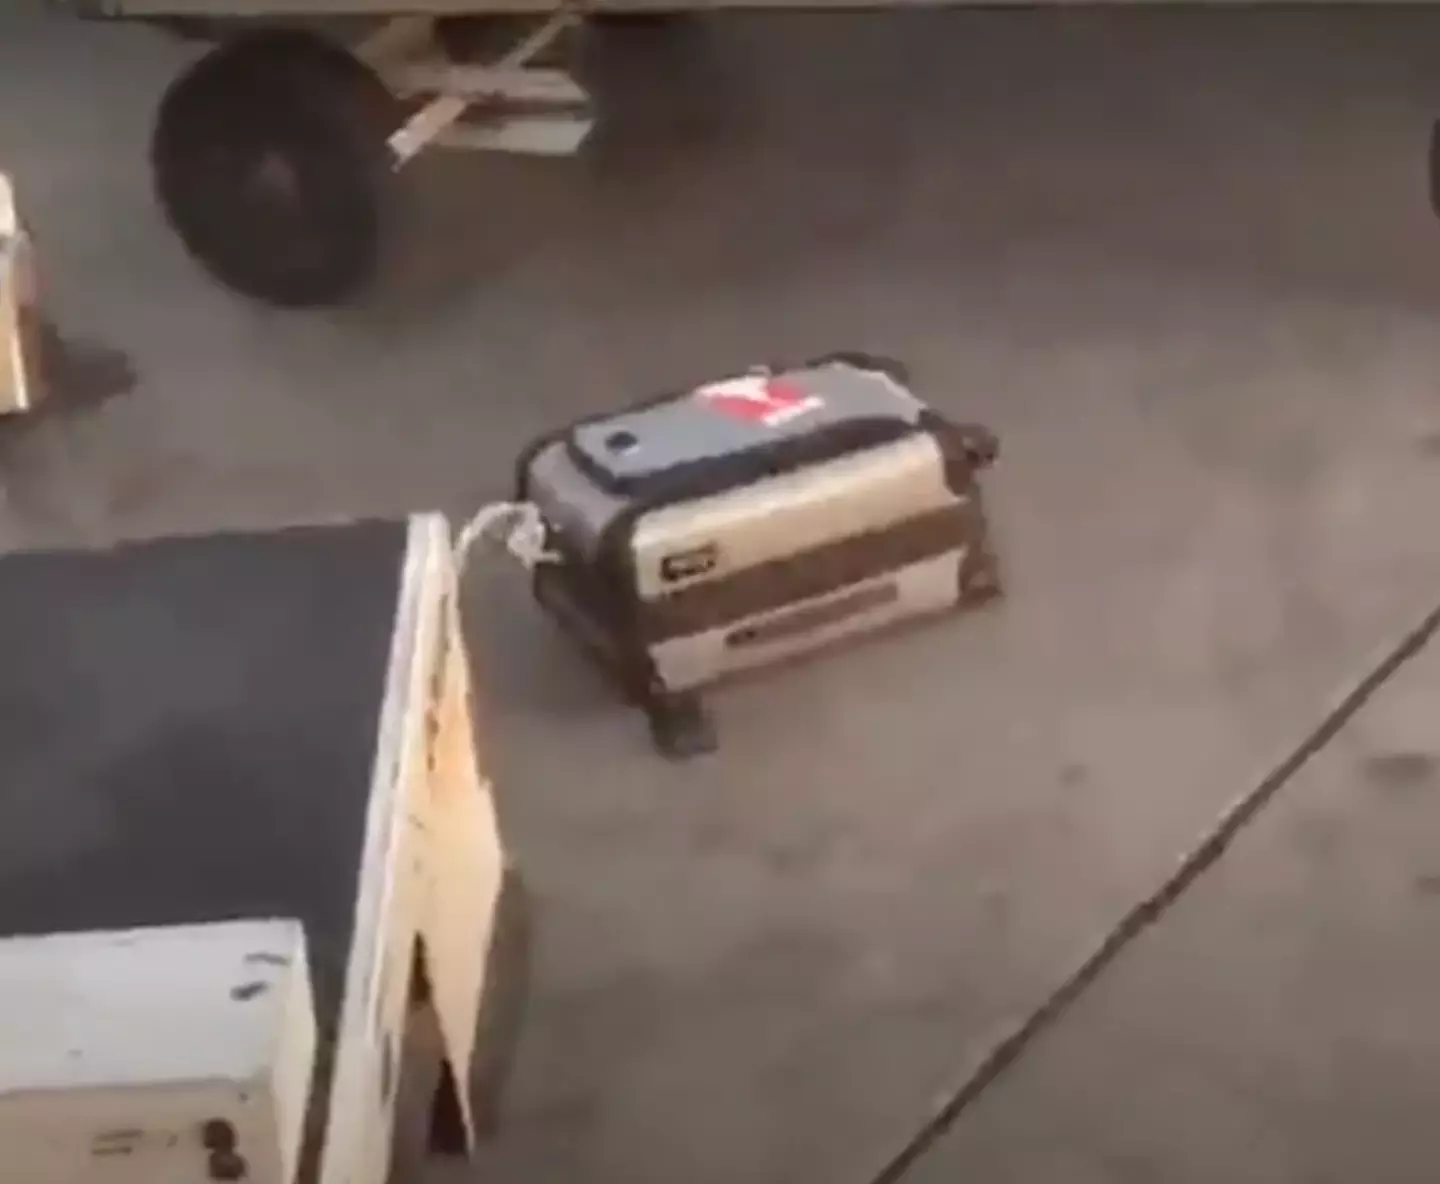 The TikToker filmed an airport worker roughly handling her suitcase, which was labeled as 'fragile'.